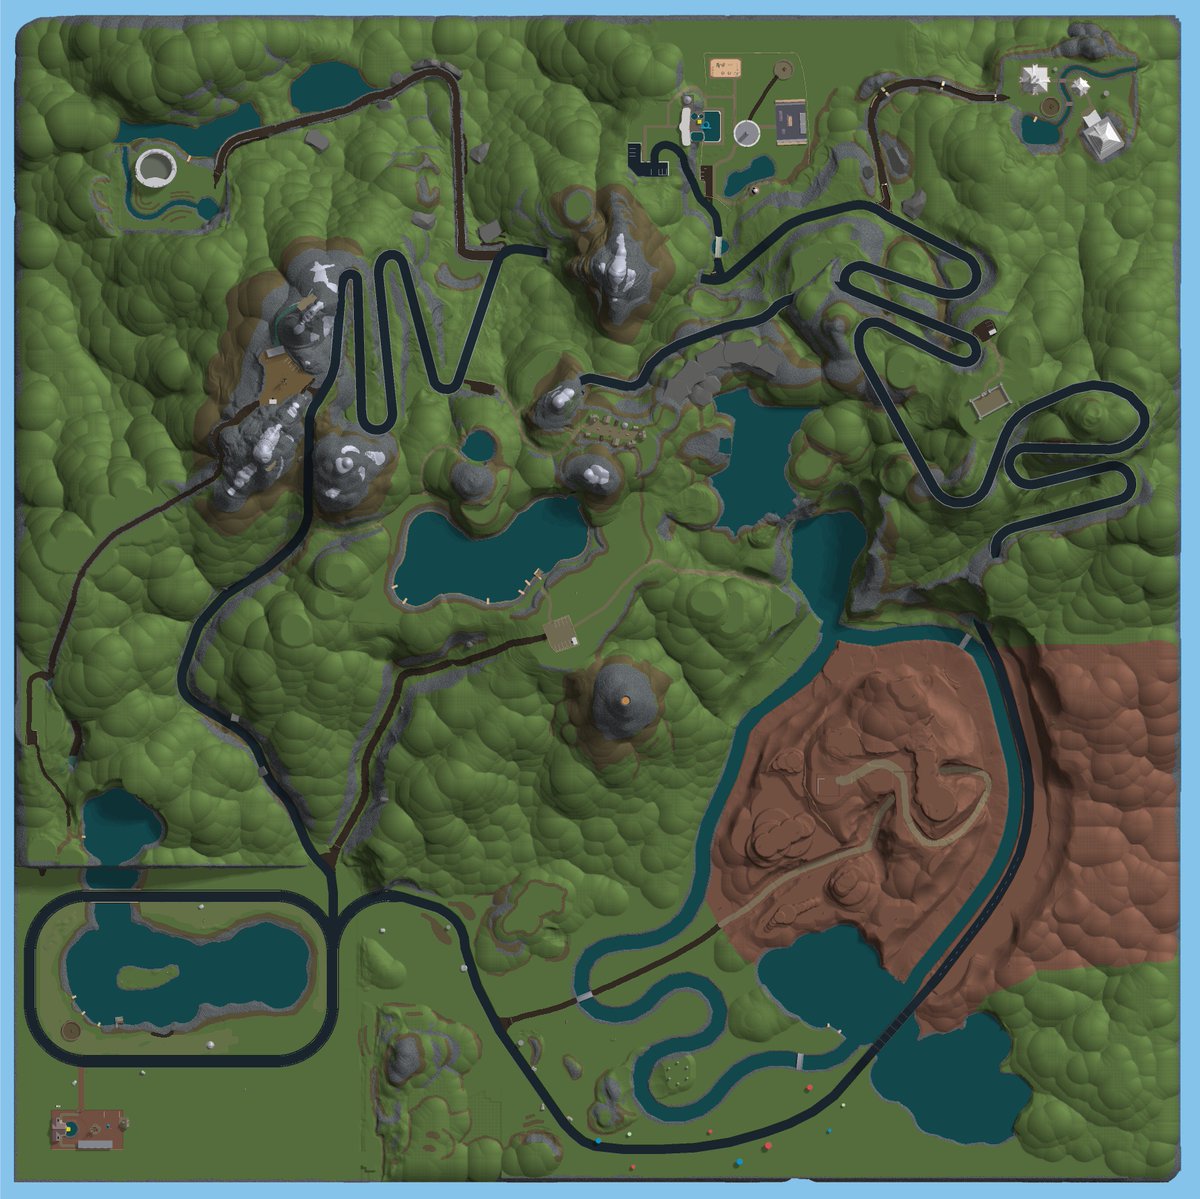 Simon On Twitter The Mountainous Backpacking Map So Far Soon You Ll Be Able To Travel In Style In Your Very Own Compact Rv Or Supercar Me And Rblxopplo Have Been Working On - roblox top down minimap image